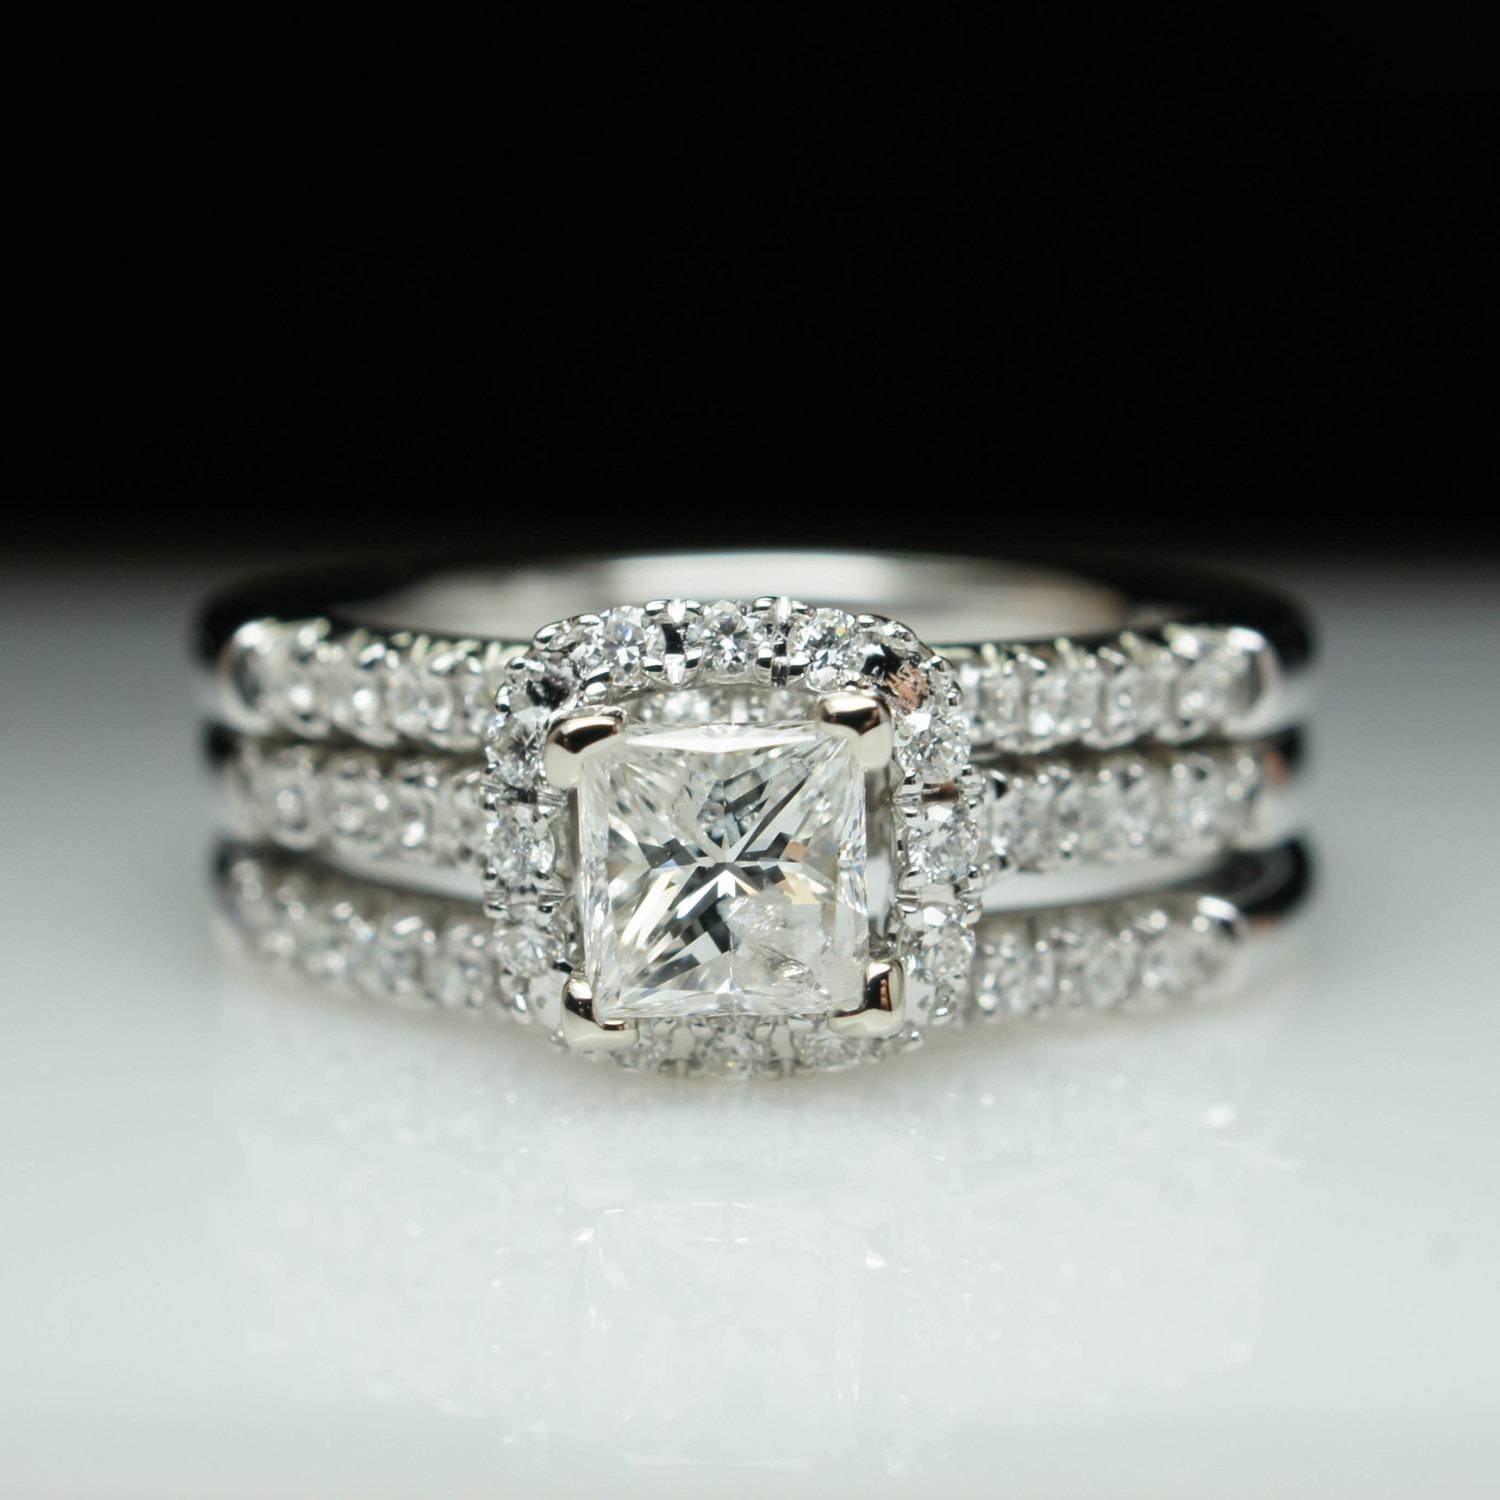 Sale Princess Cut Diamond Halo Engagement Ring & Two Wedding For Newest Halo Anniversary Rings (View 15 of 25)